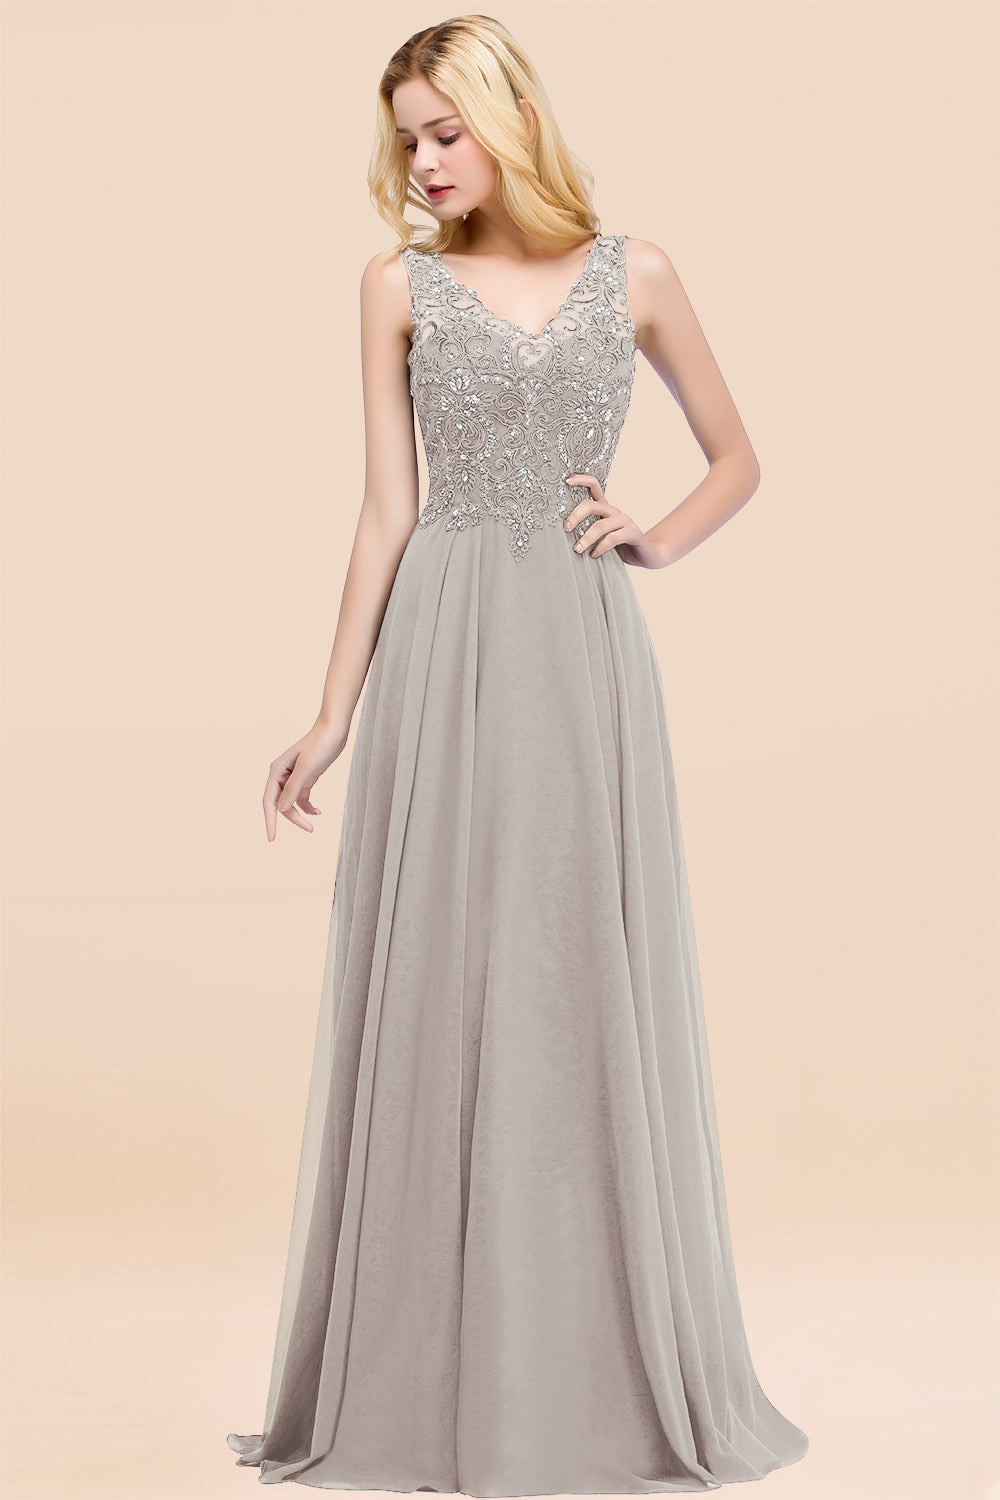 Dusty Rose Long A-line Lace V-Neck Bridesmaid Dresses With Appliques-BIZTUNNEL